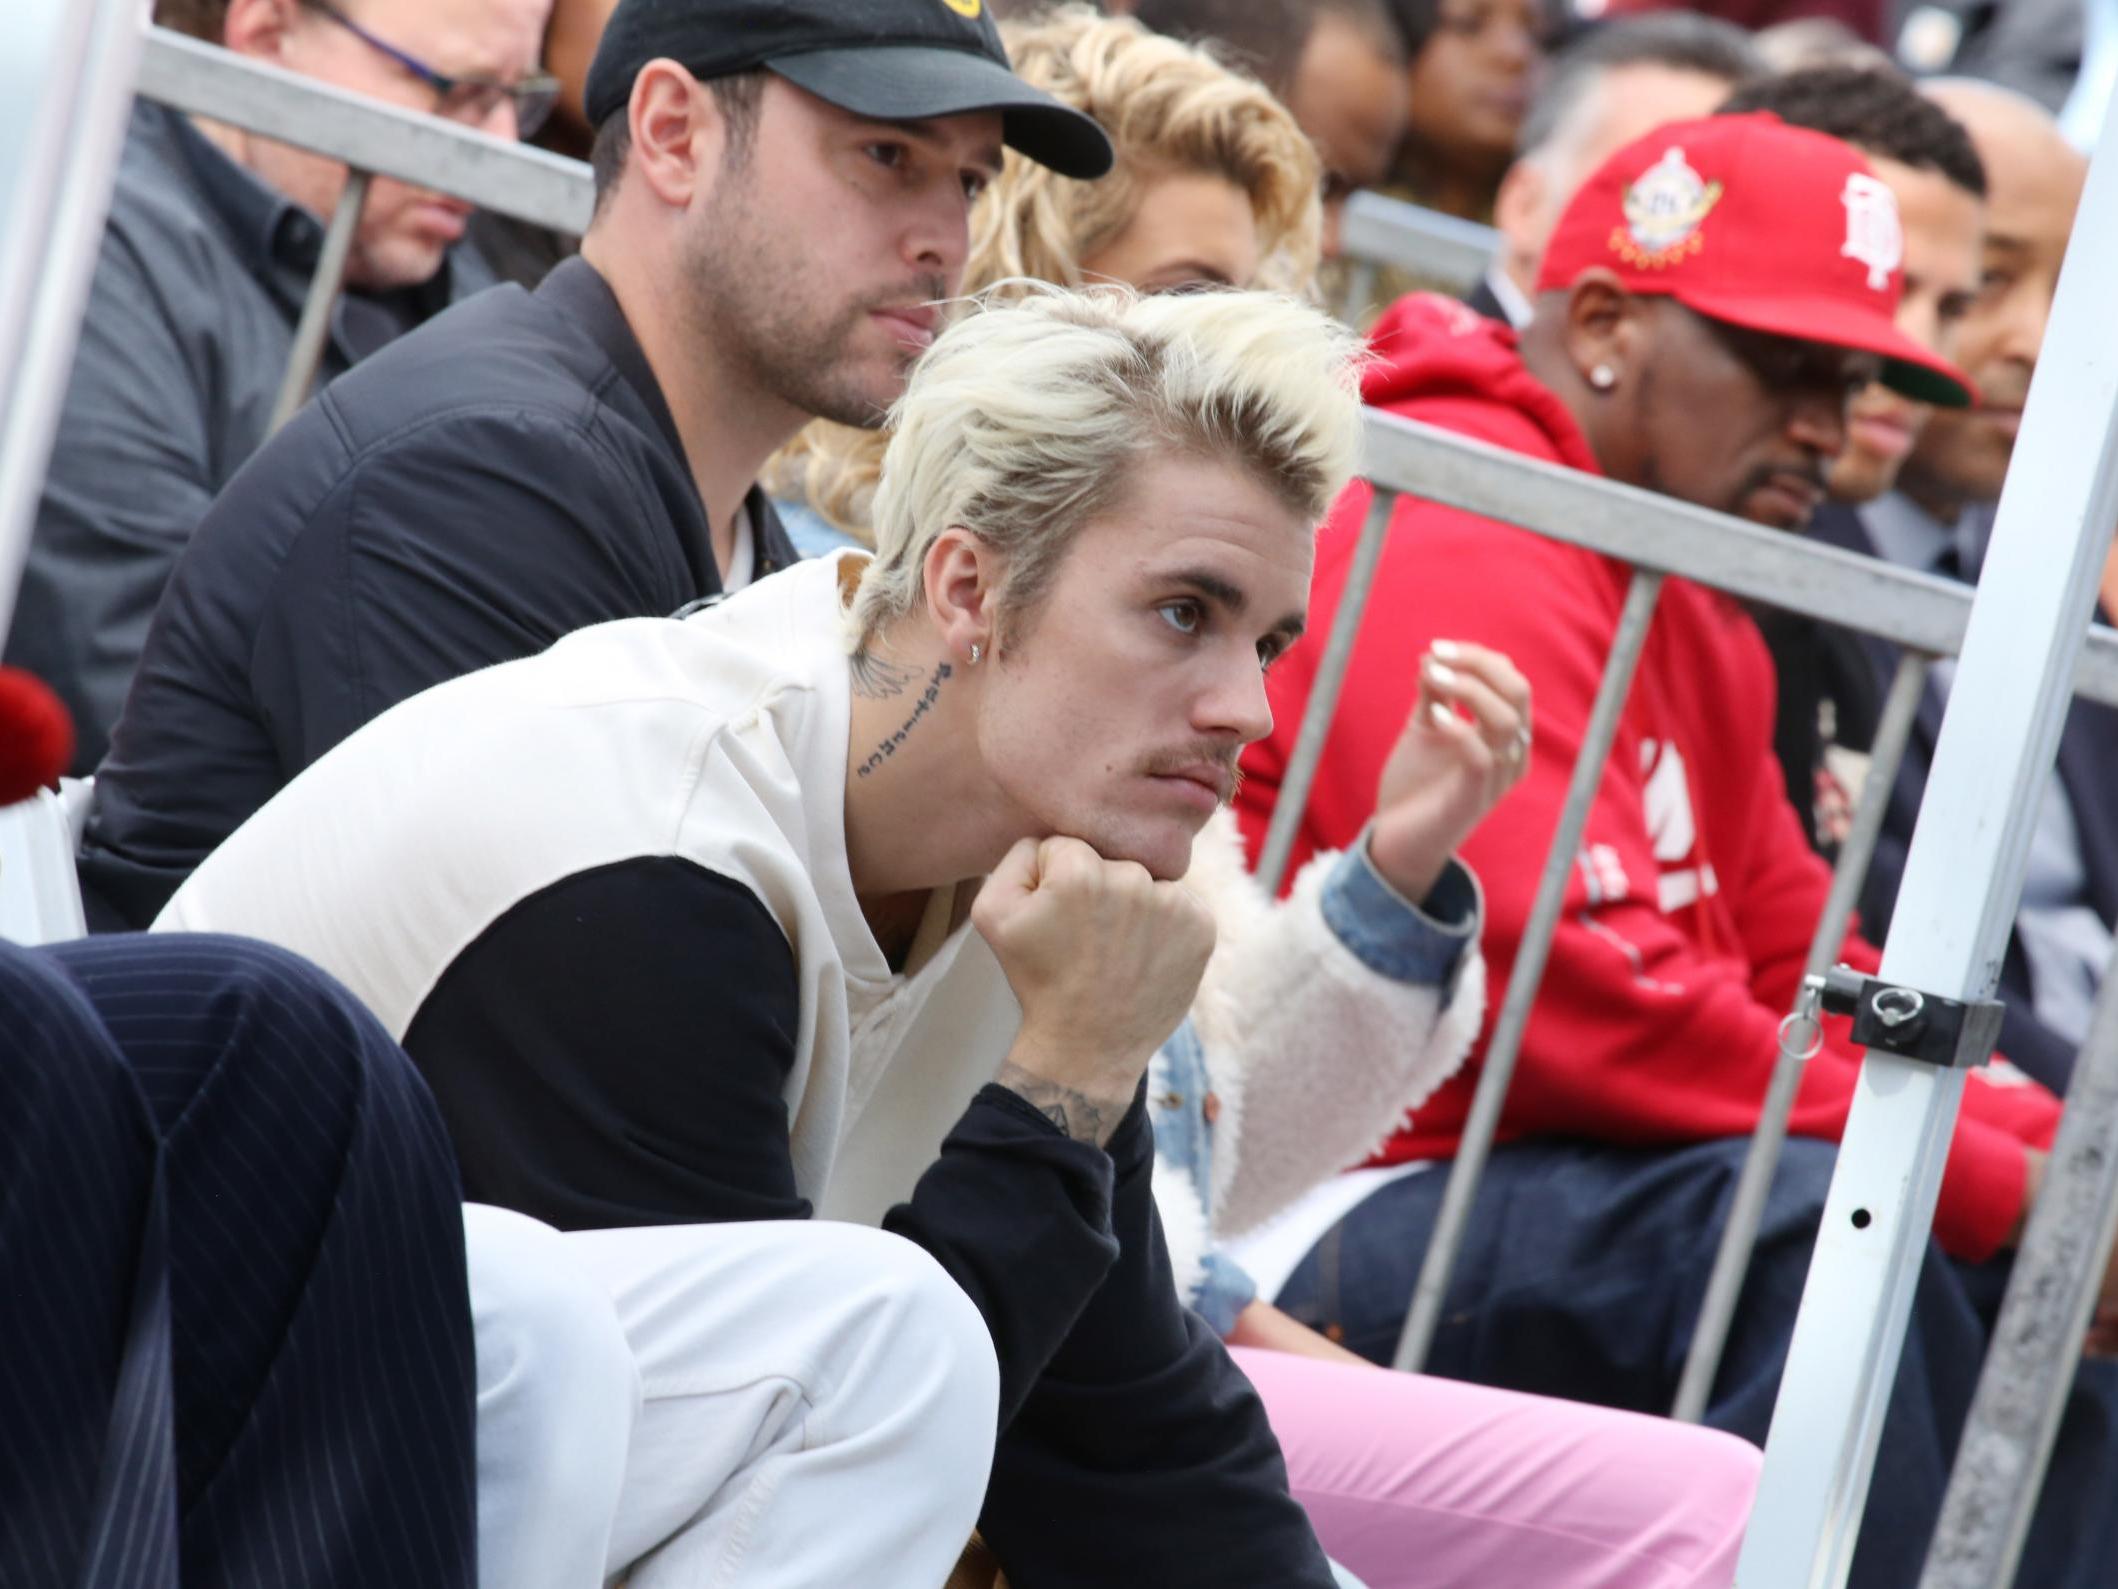 Justin Bieber gives emotional speech at album preview: 'I don't even think I should be alive'